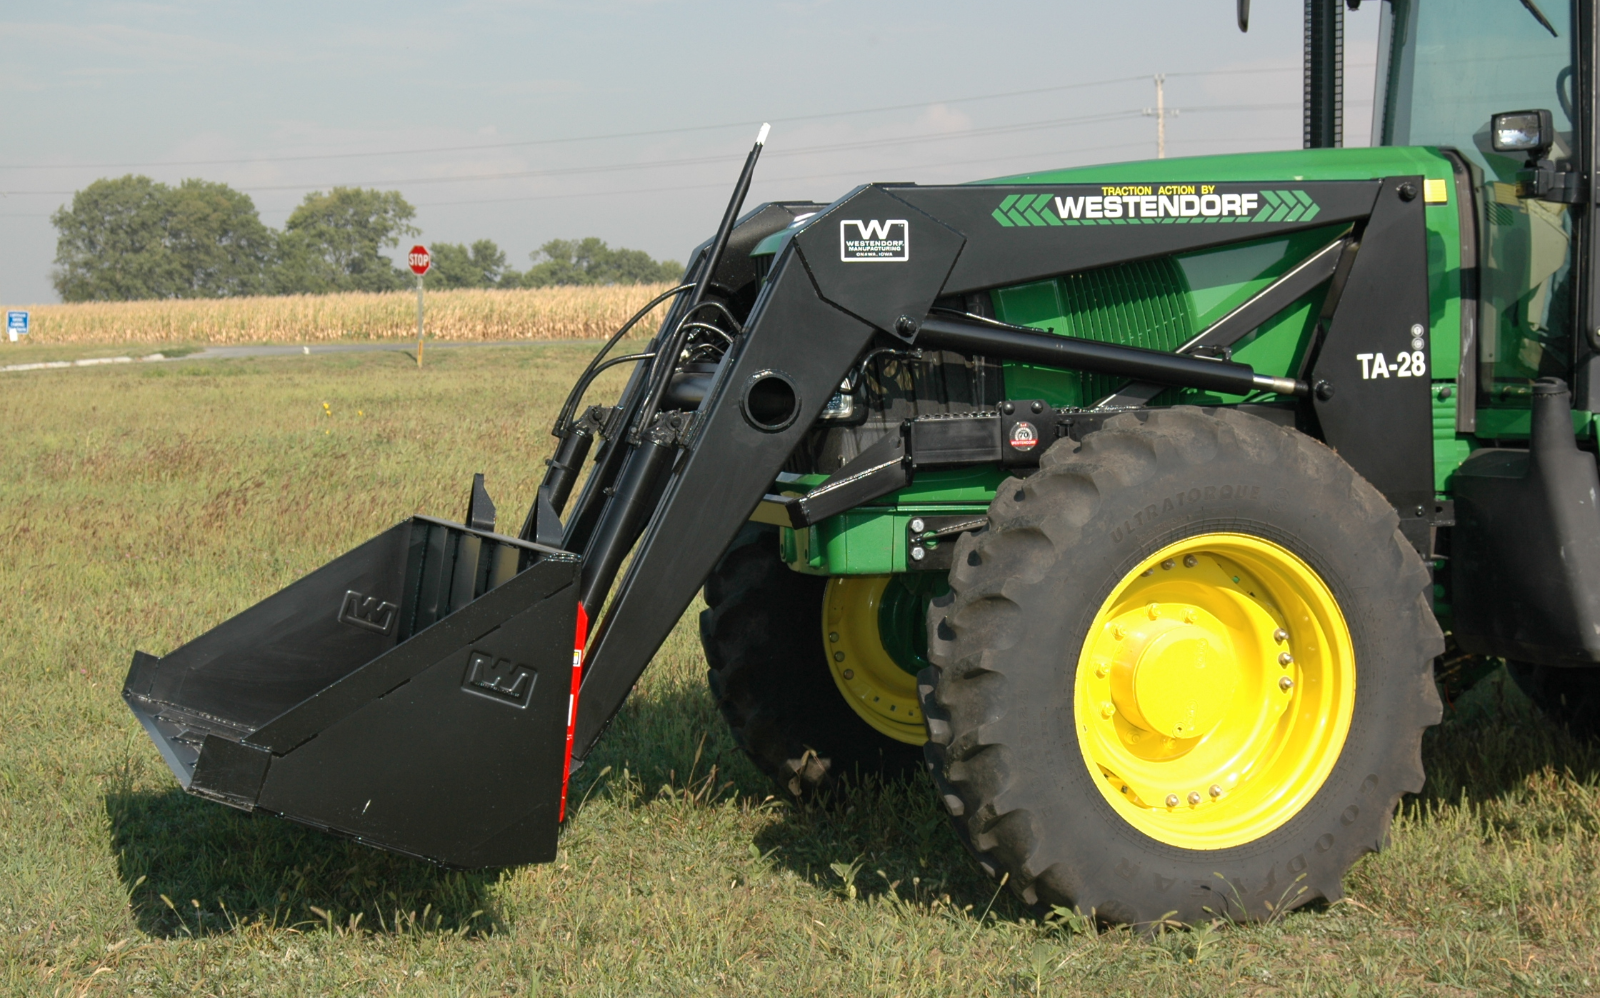 The fit makes all the difference when rating the performance of your loader. This loader allows excellent clearance and does not limit your turning radius. Low-profile fit of the loader increases visibility and sightlines while working.